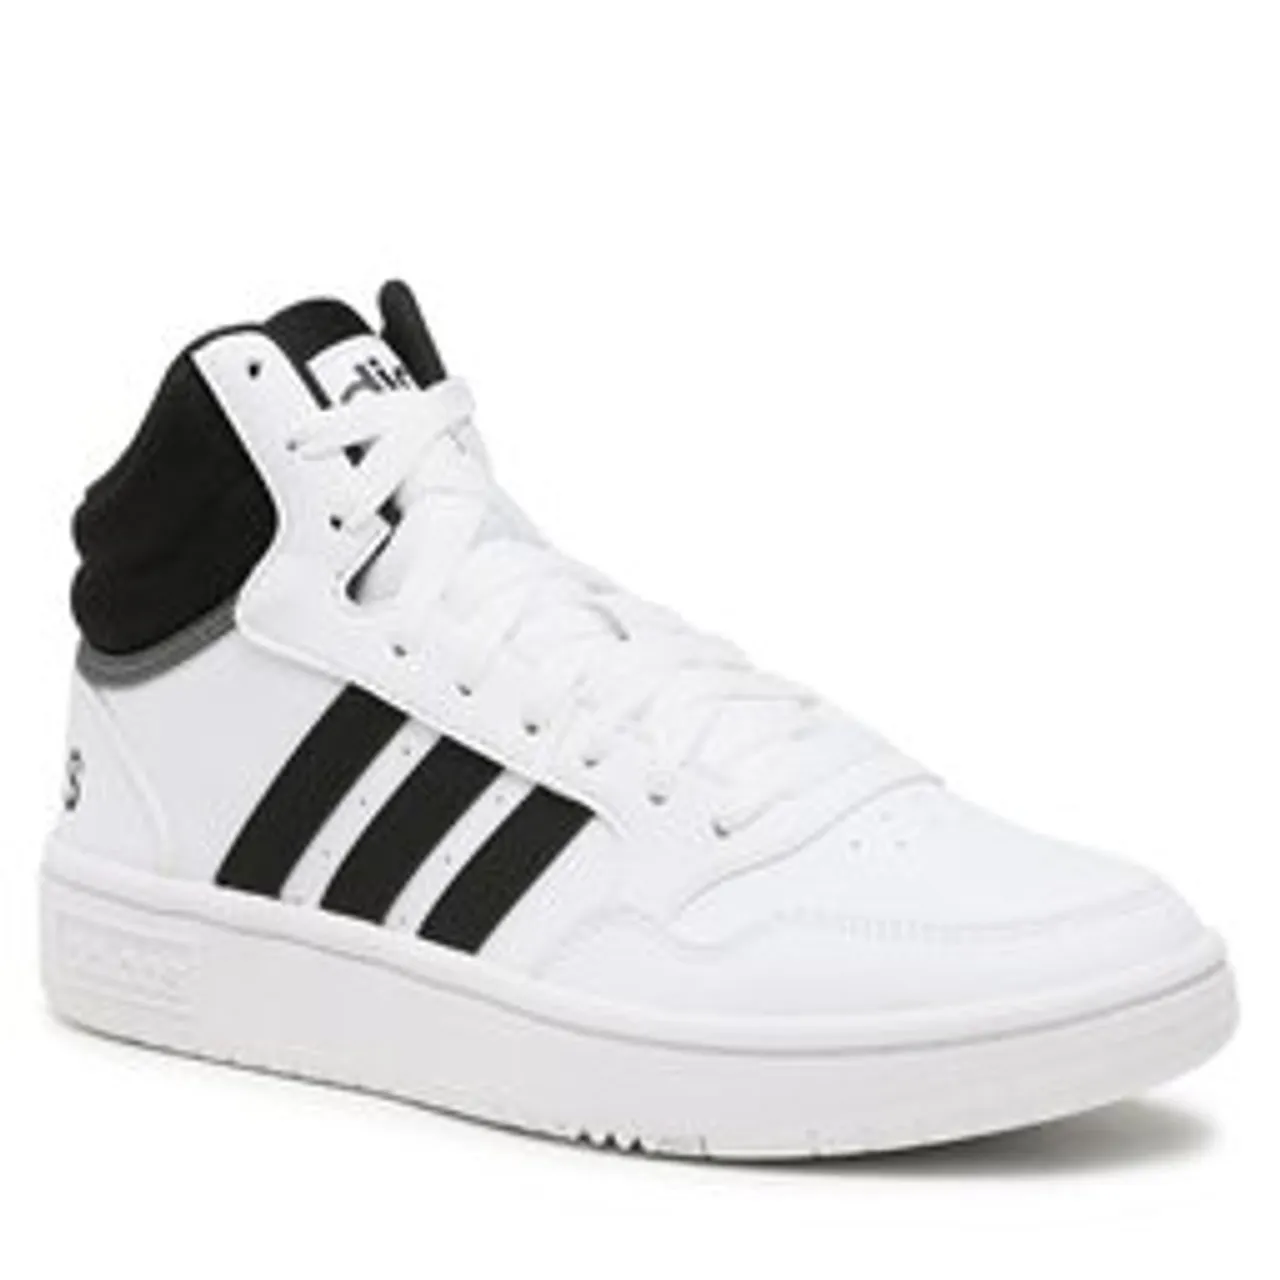 Sneakers adidas Hoops 3.0 Mid Classic Vintage Shoes GW3019 Weiß